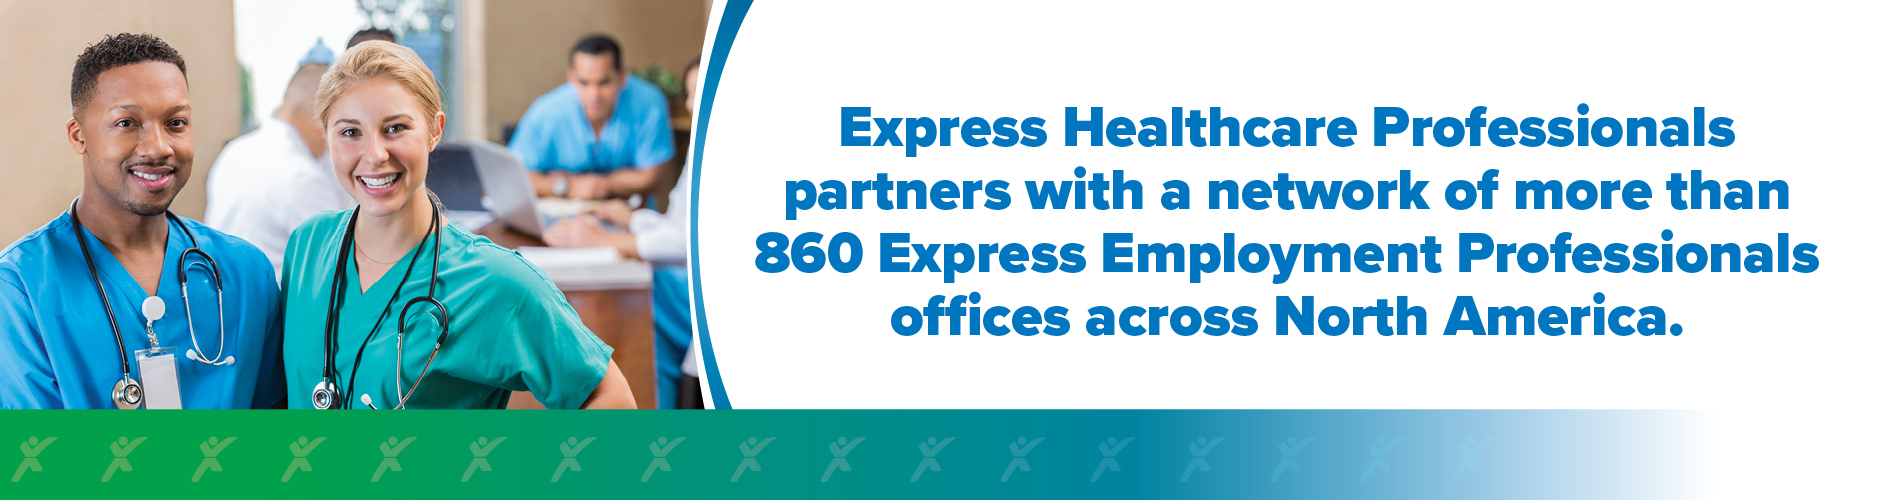 Express Healthcare Professionals partners with a network of more than 860 Express Employment Professionals offices across North America - Image shows 2 smilins healthcare professionals